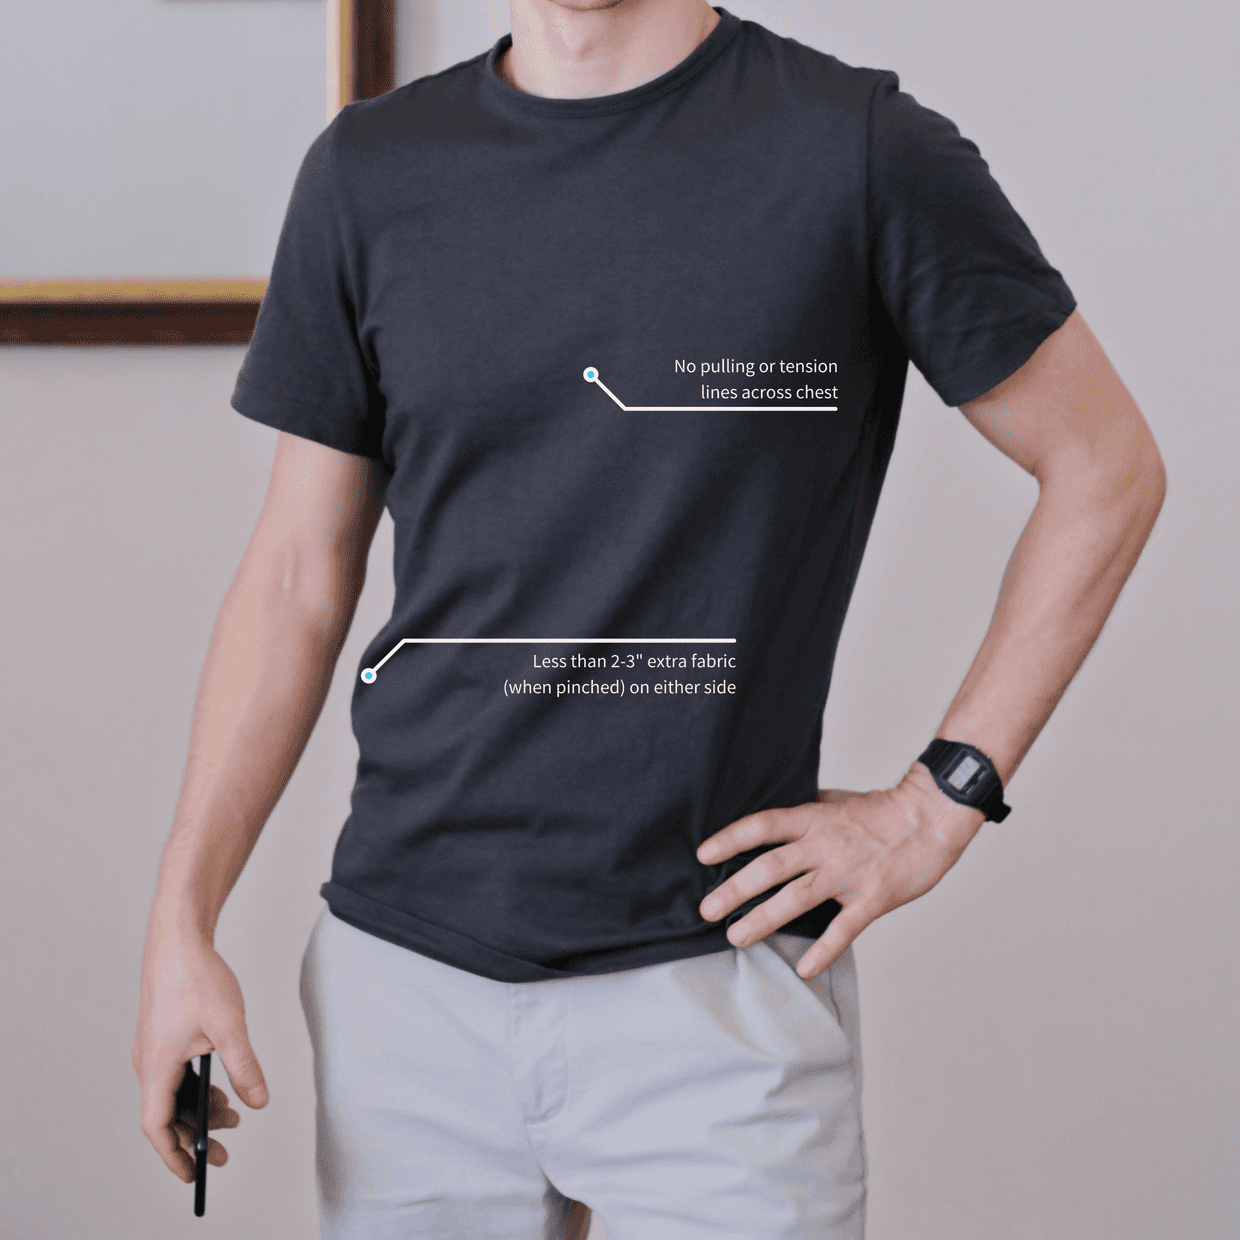 How a T-Shirt Should Fit: The Ultimate Guide